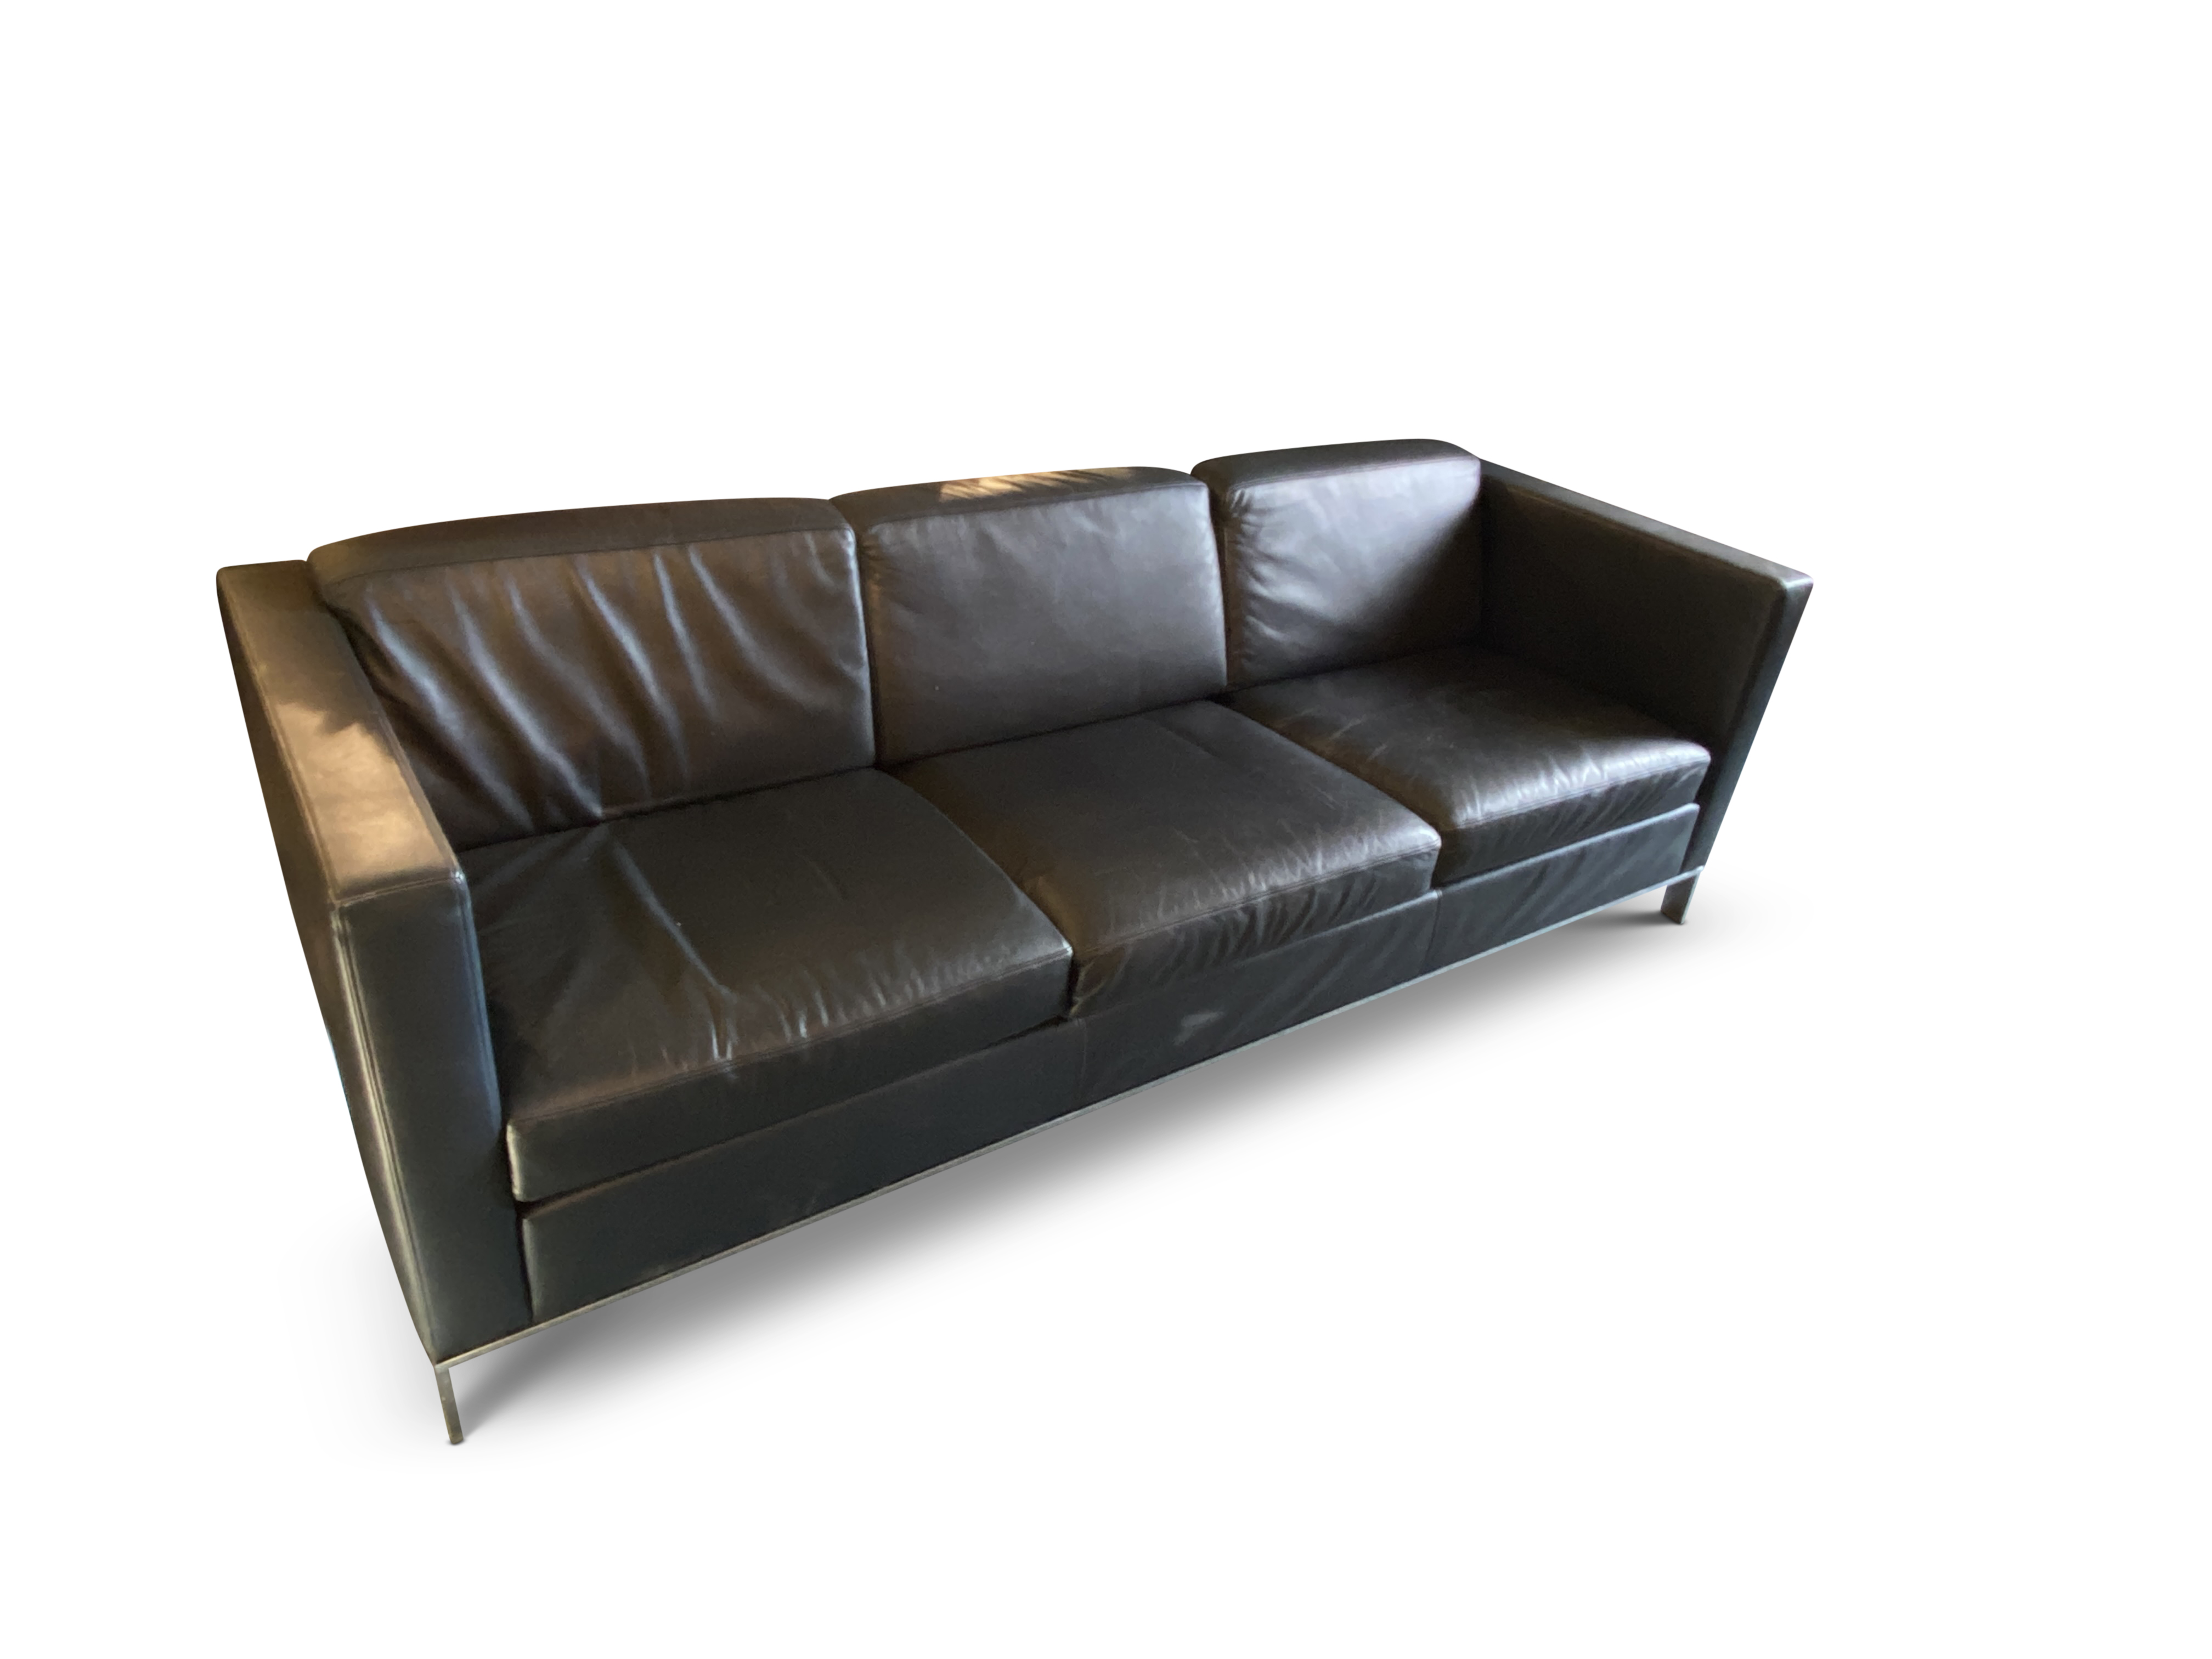 A Norman Foster Walter Knoll 500 dark navy leather three-seater sofa